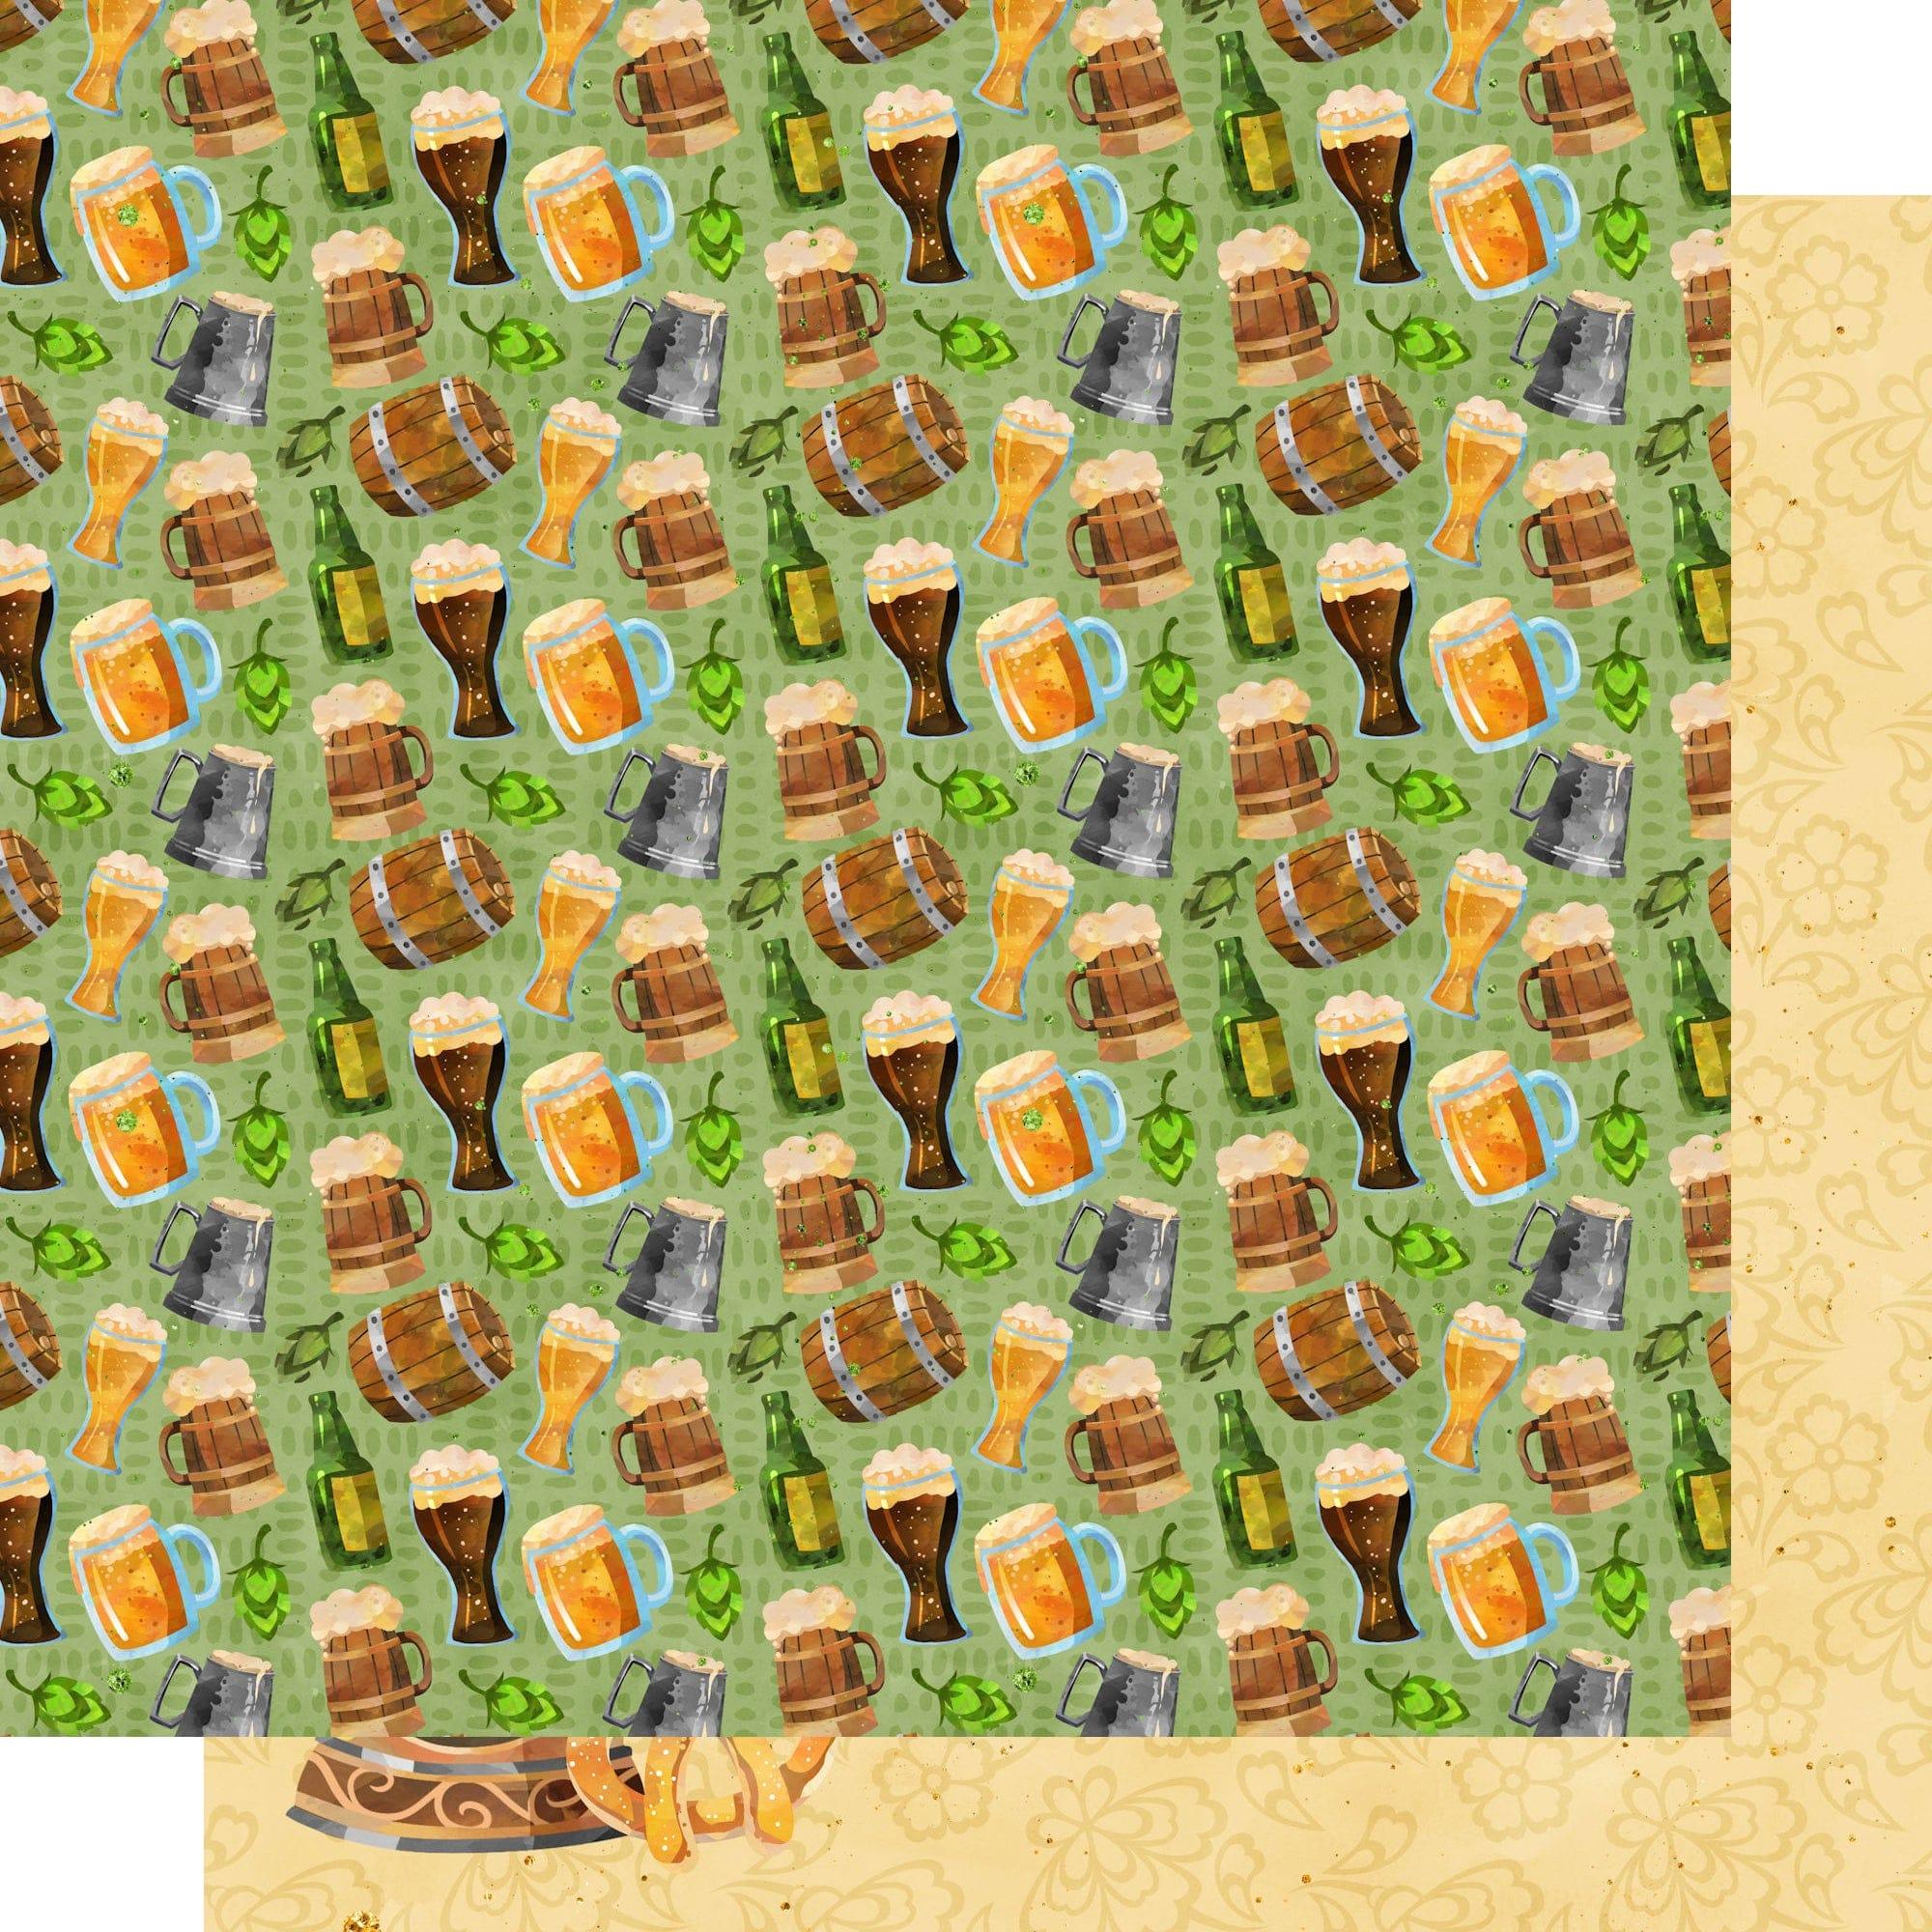 PhantasiaDesign's Oktoberfest Collection Beer Me 12 x 12 Double-Sided Scrapbook Paper by SSC Designs - Scrapbook Supply Companies